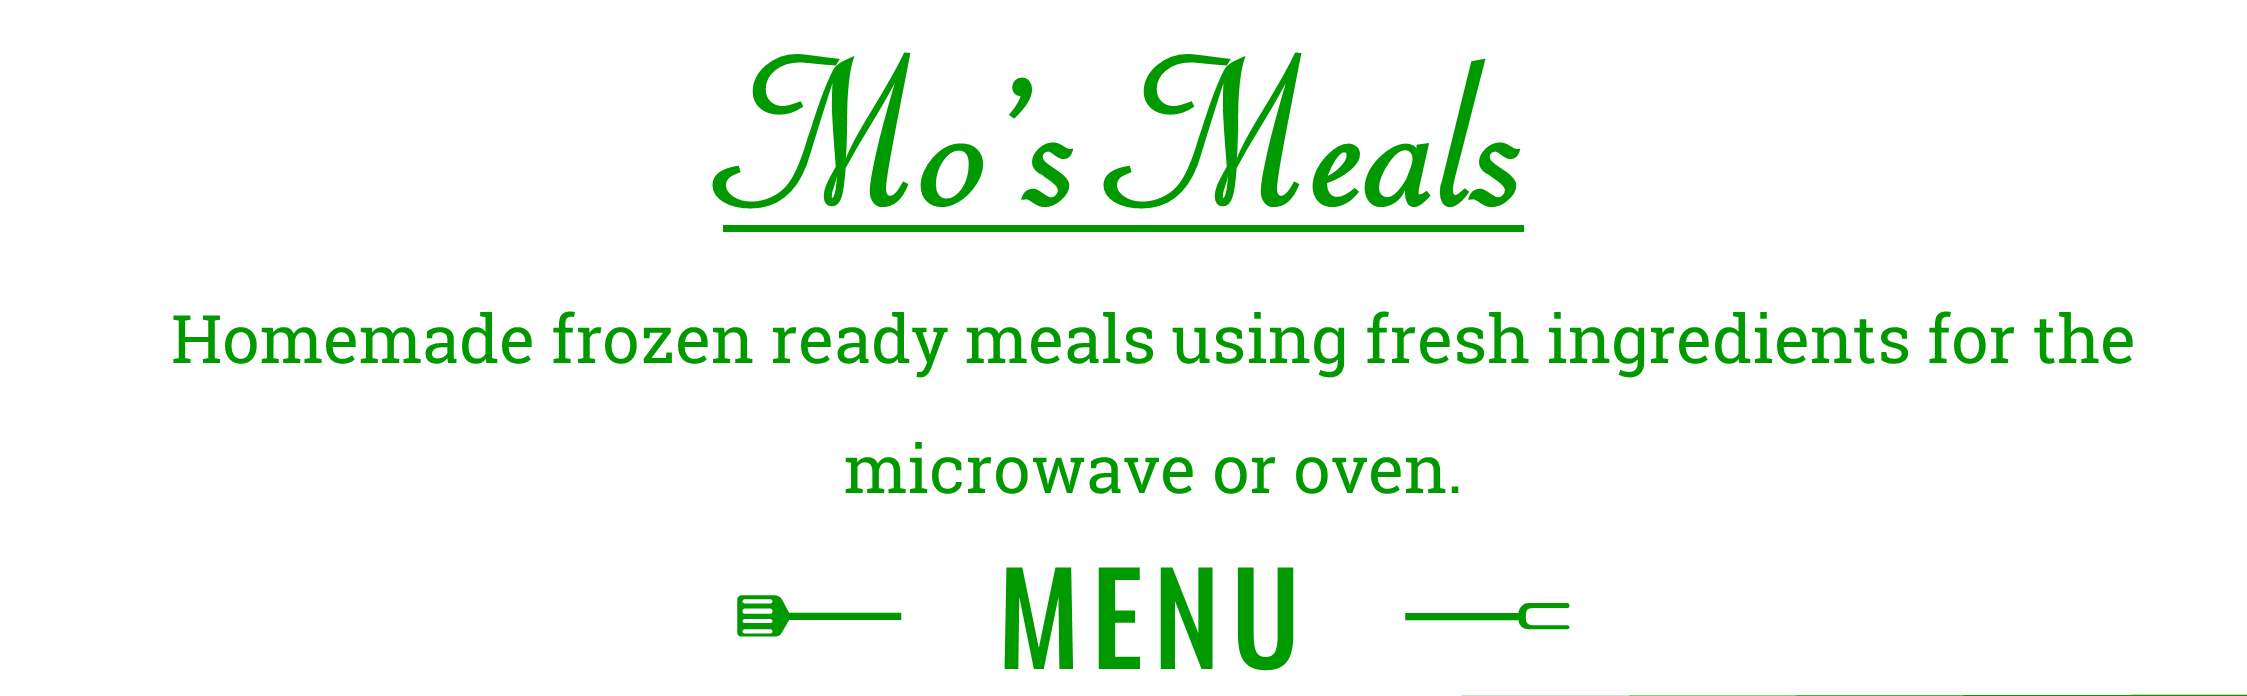 Mo's Meals Homemade frozen ready meals